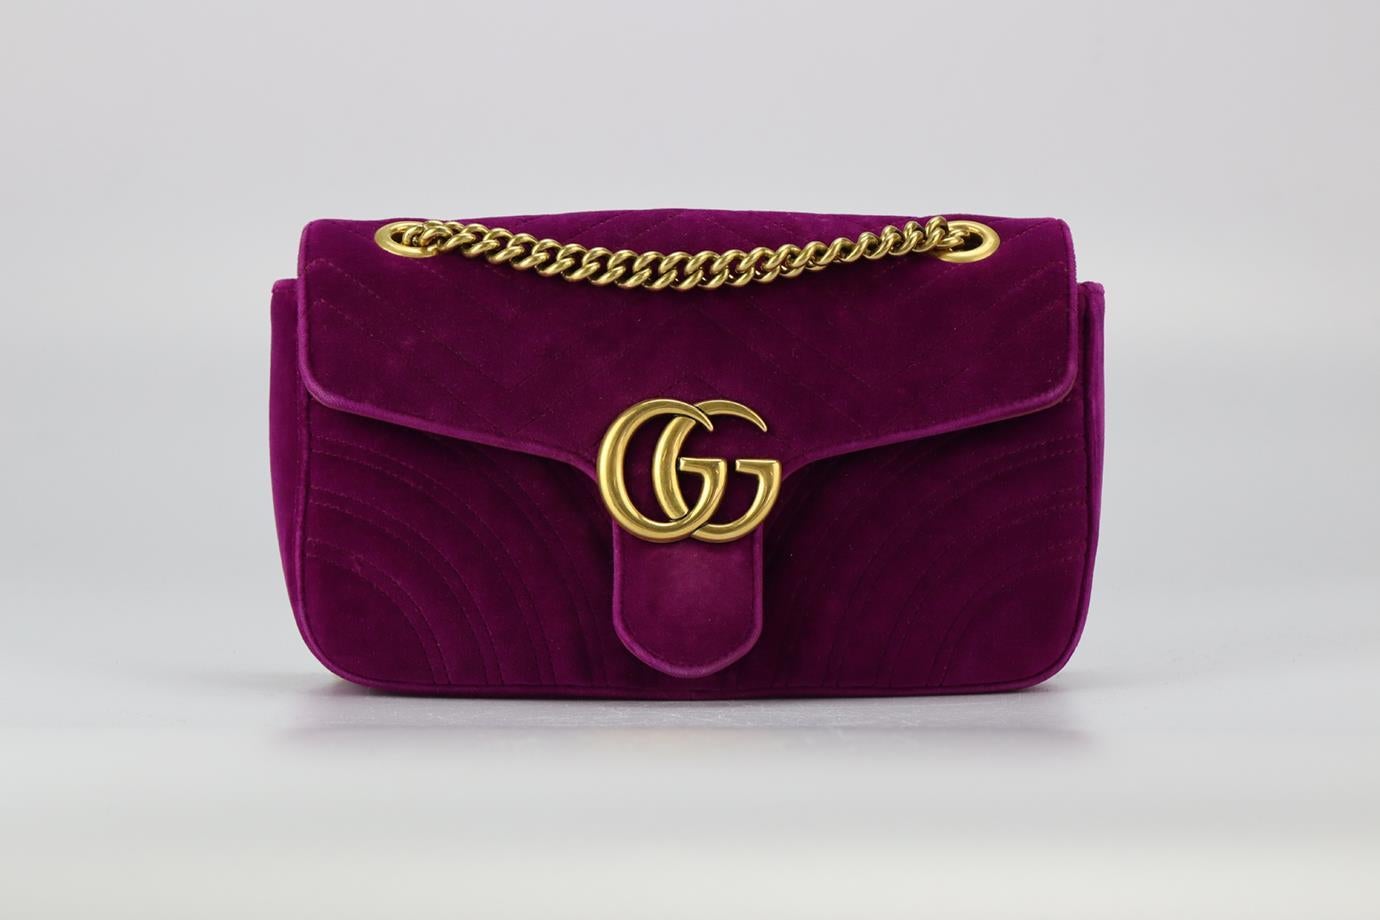 Gucci Gg Marmont Quilted Velvet Shoulder Bag. Purple. Push lock fastening - Front. Comes with - dustbag and box. Height: 6.4 in. Width: 10.1 in. Depth: 2.7 in. Strap drop: 21 in. Condition: Used. Very good condition - Wear to outer material at